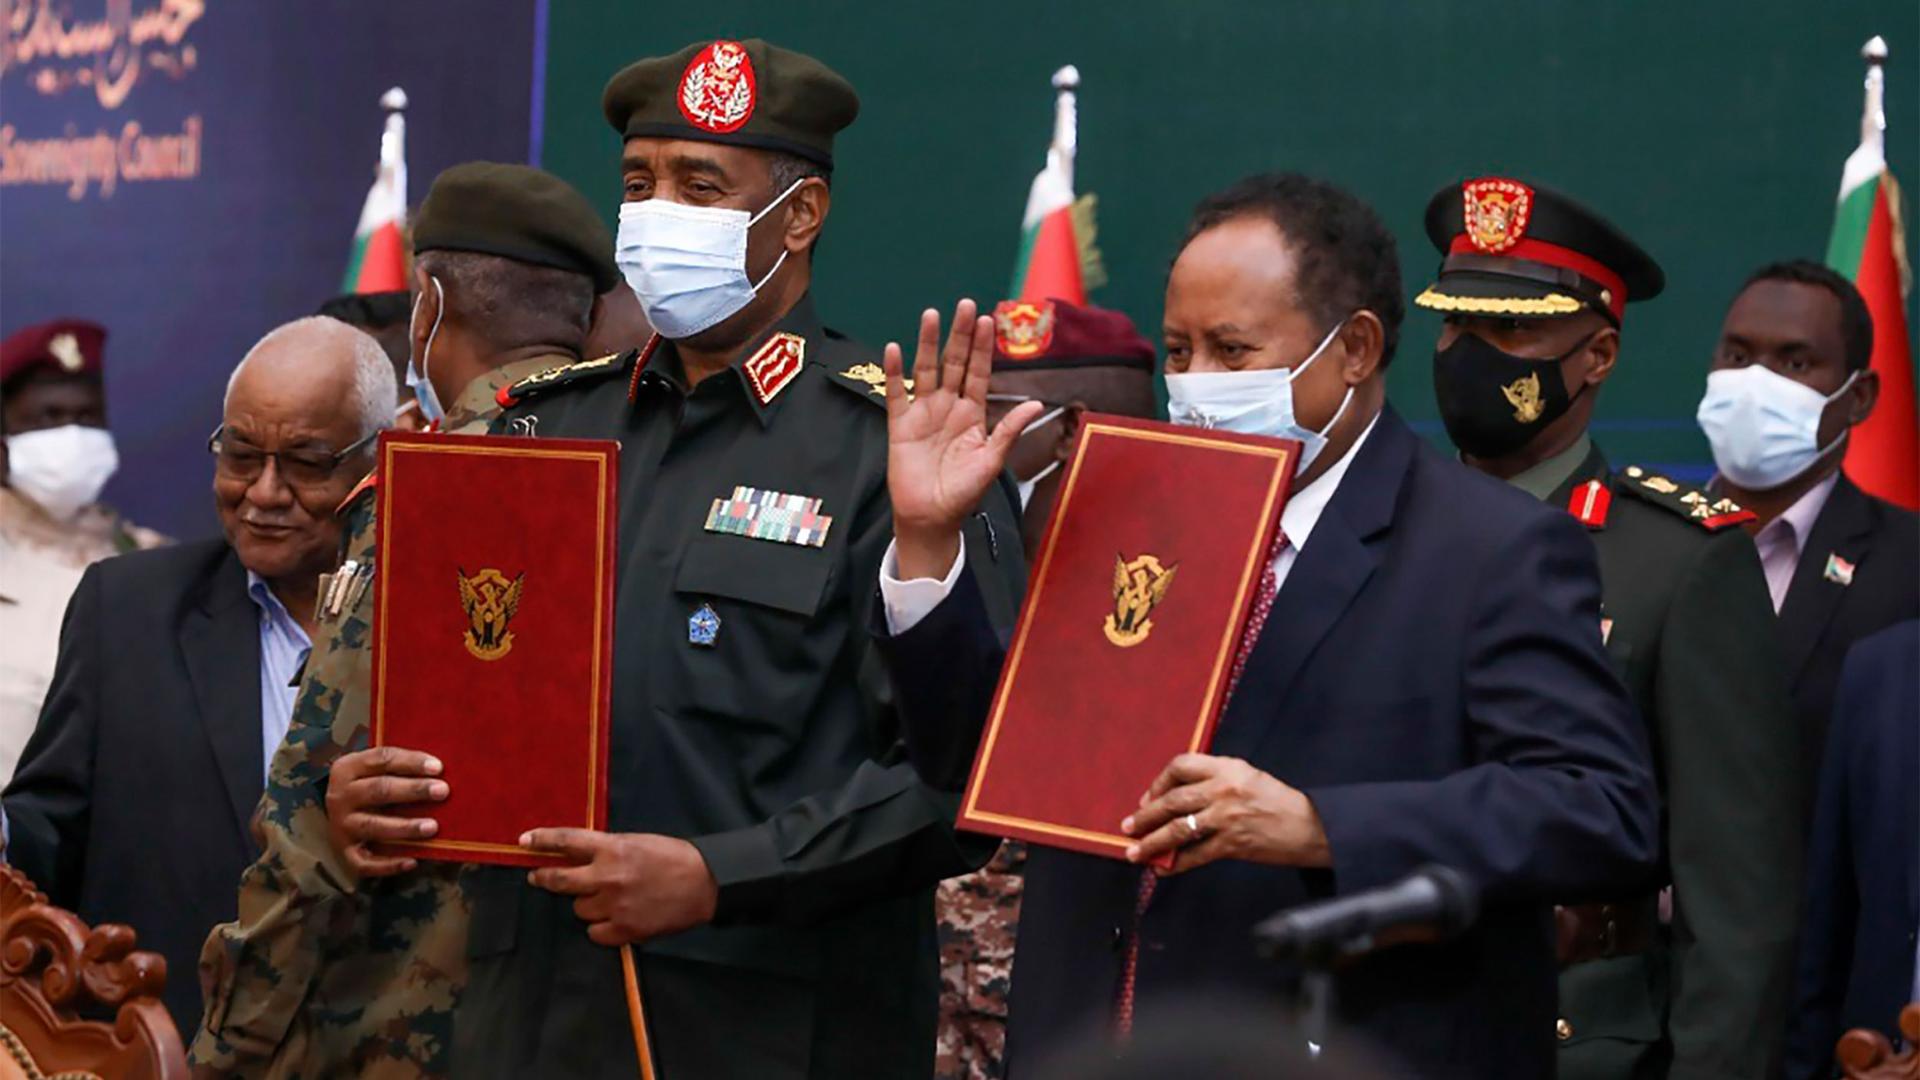 Sudan's top general Abdel Fattah al-Burhan and Prime Minister Abdalla Hamdok hold documents during a ceremony to reinstate Hamdok, who was deposed in a coup last month, in Khartoum, Sudan